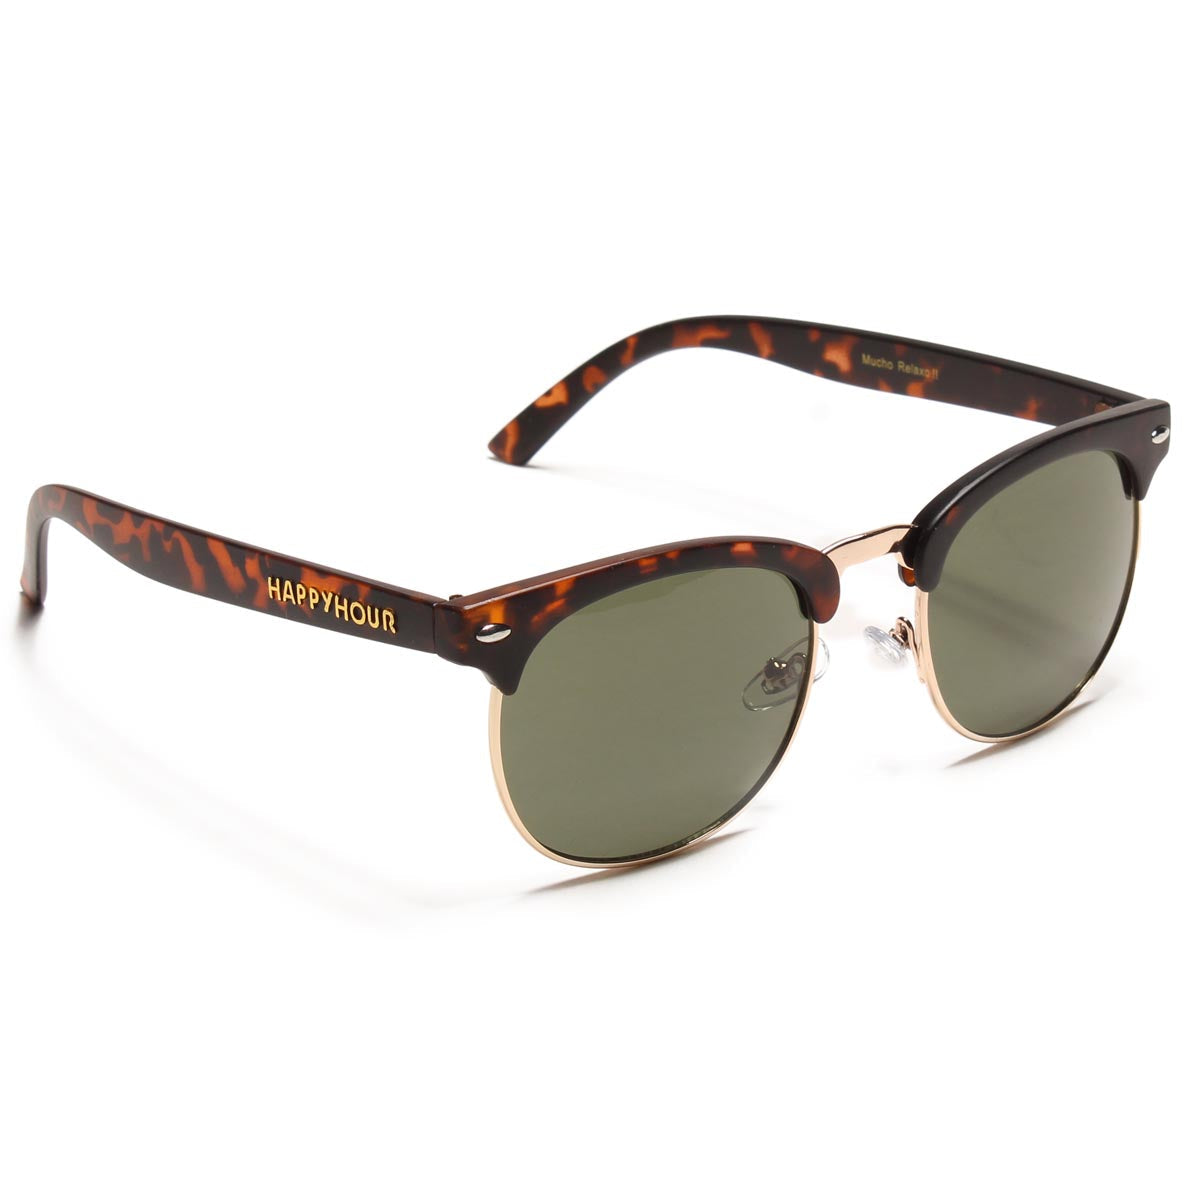 Happy Hour G2 Sunglasses - Frosted Tortoise/G15 Lens image 1